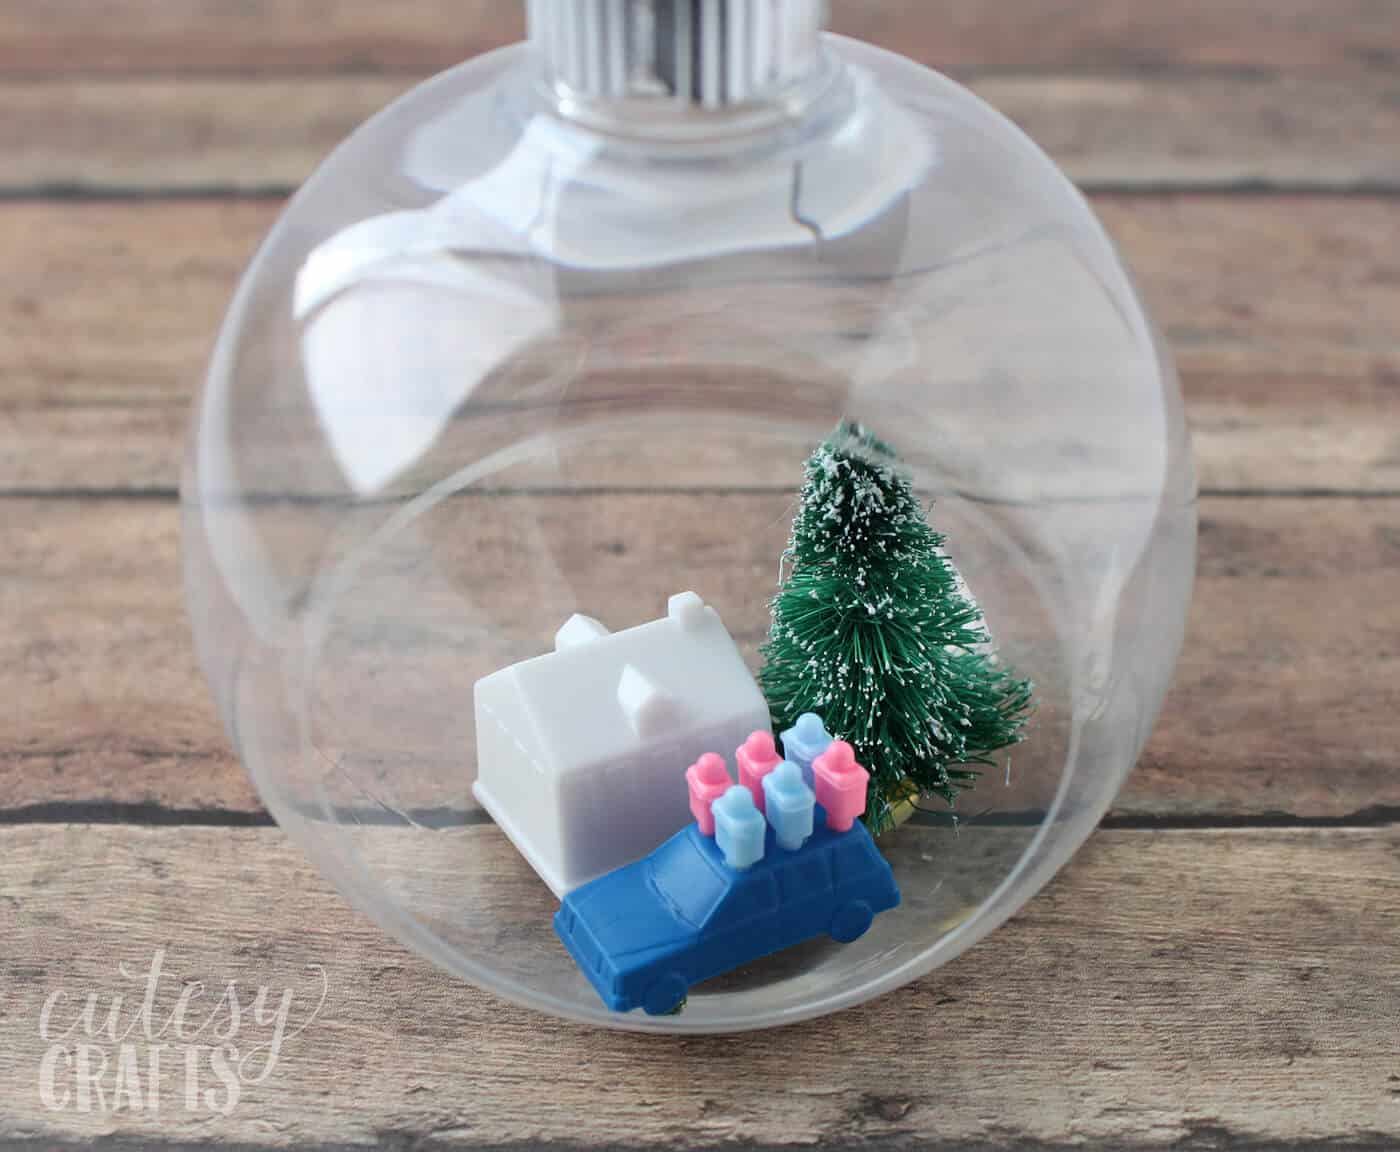 Do you love making your own DIY Christmas tree ornaments? This fun "Game of Life" version is based on the popular game from your childhood!